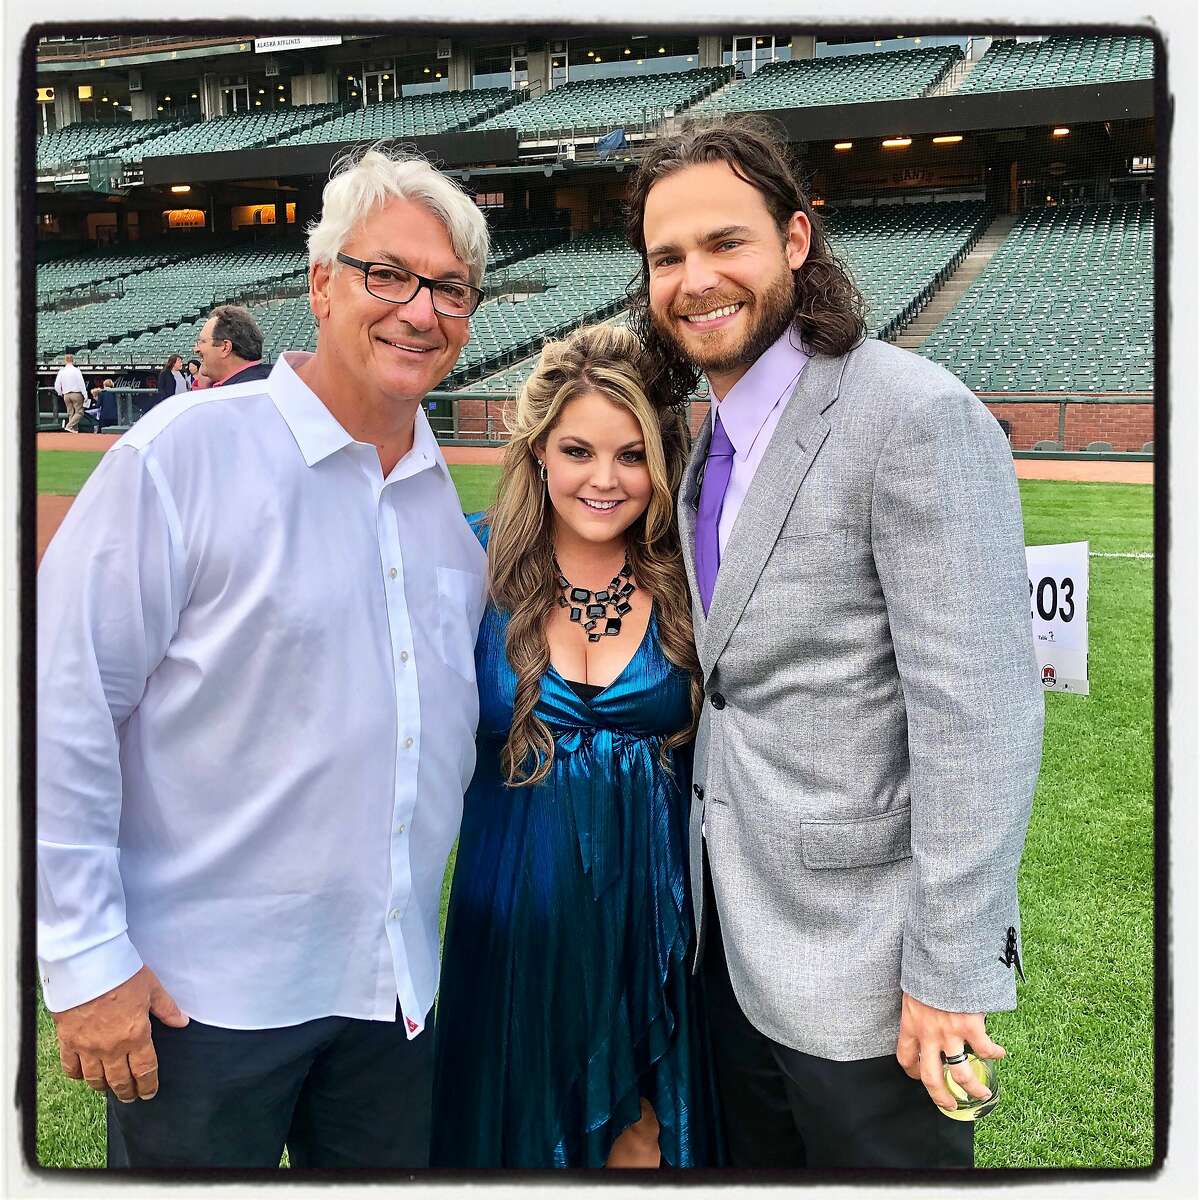 Former SF Giants pitcher Dave Dravecky (left) with Jaylynne Crawford and her husband, Giants shortstop Brandon Crawford at the BP28 Gala. August 28, 2019.